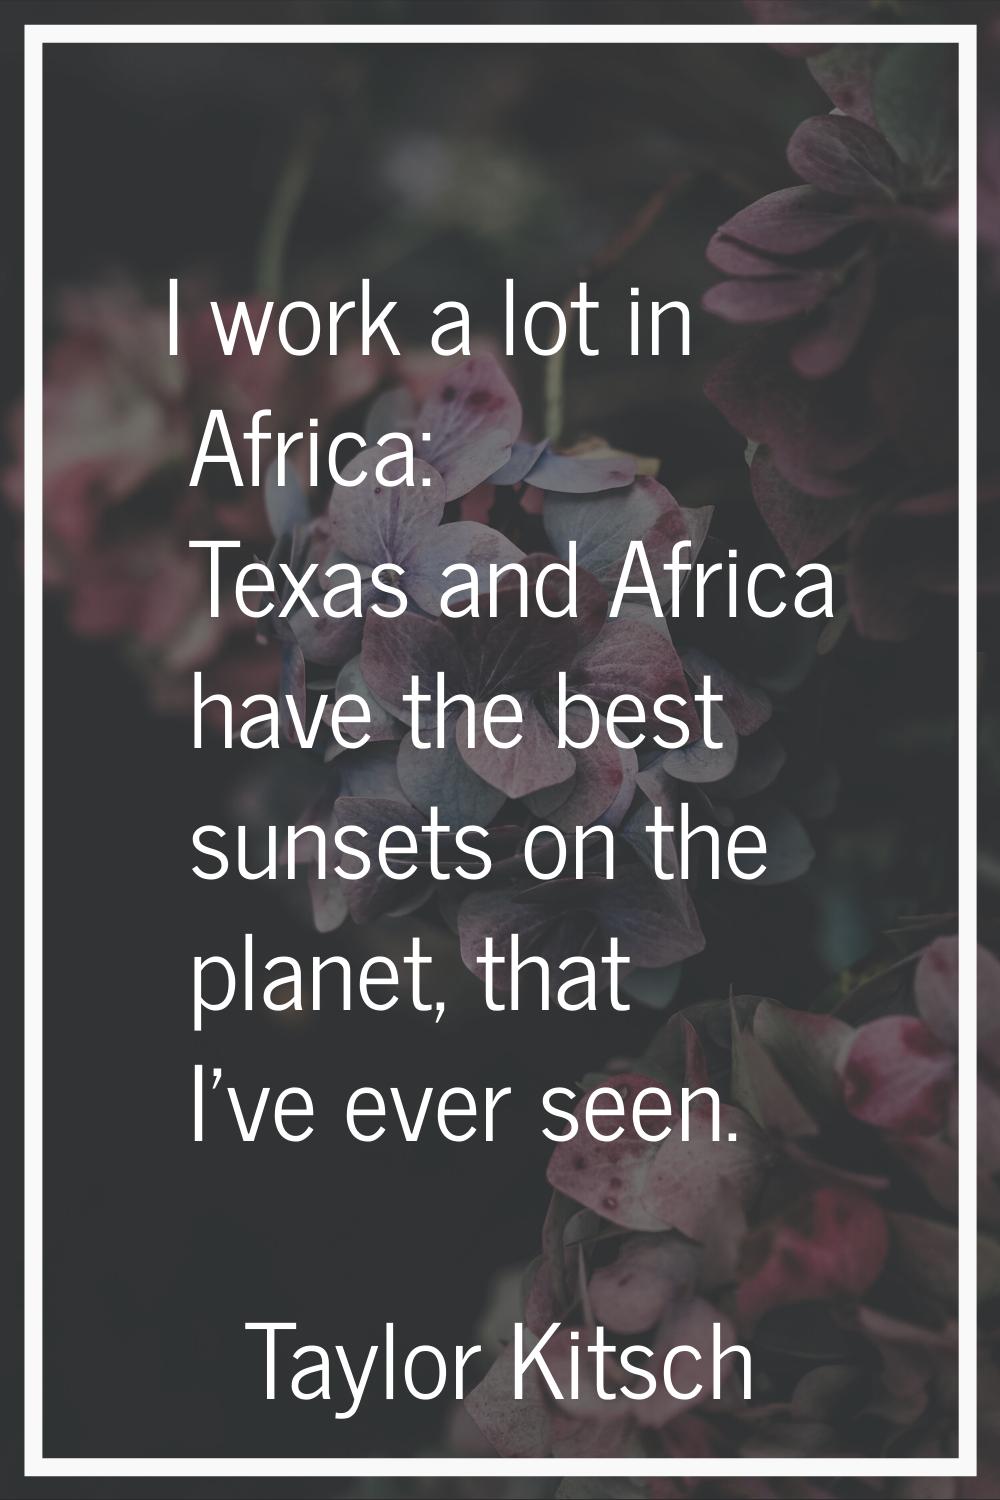 I work a lot in Africa: Texas and Africa have the best sunsets on the planet, that I've ever seen.